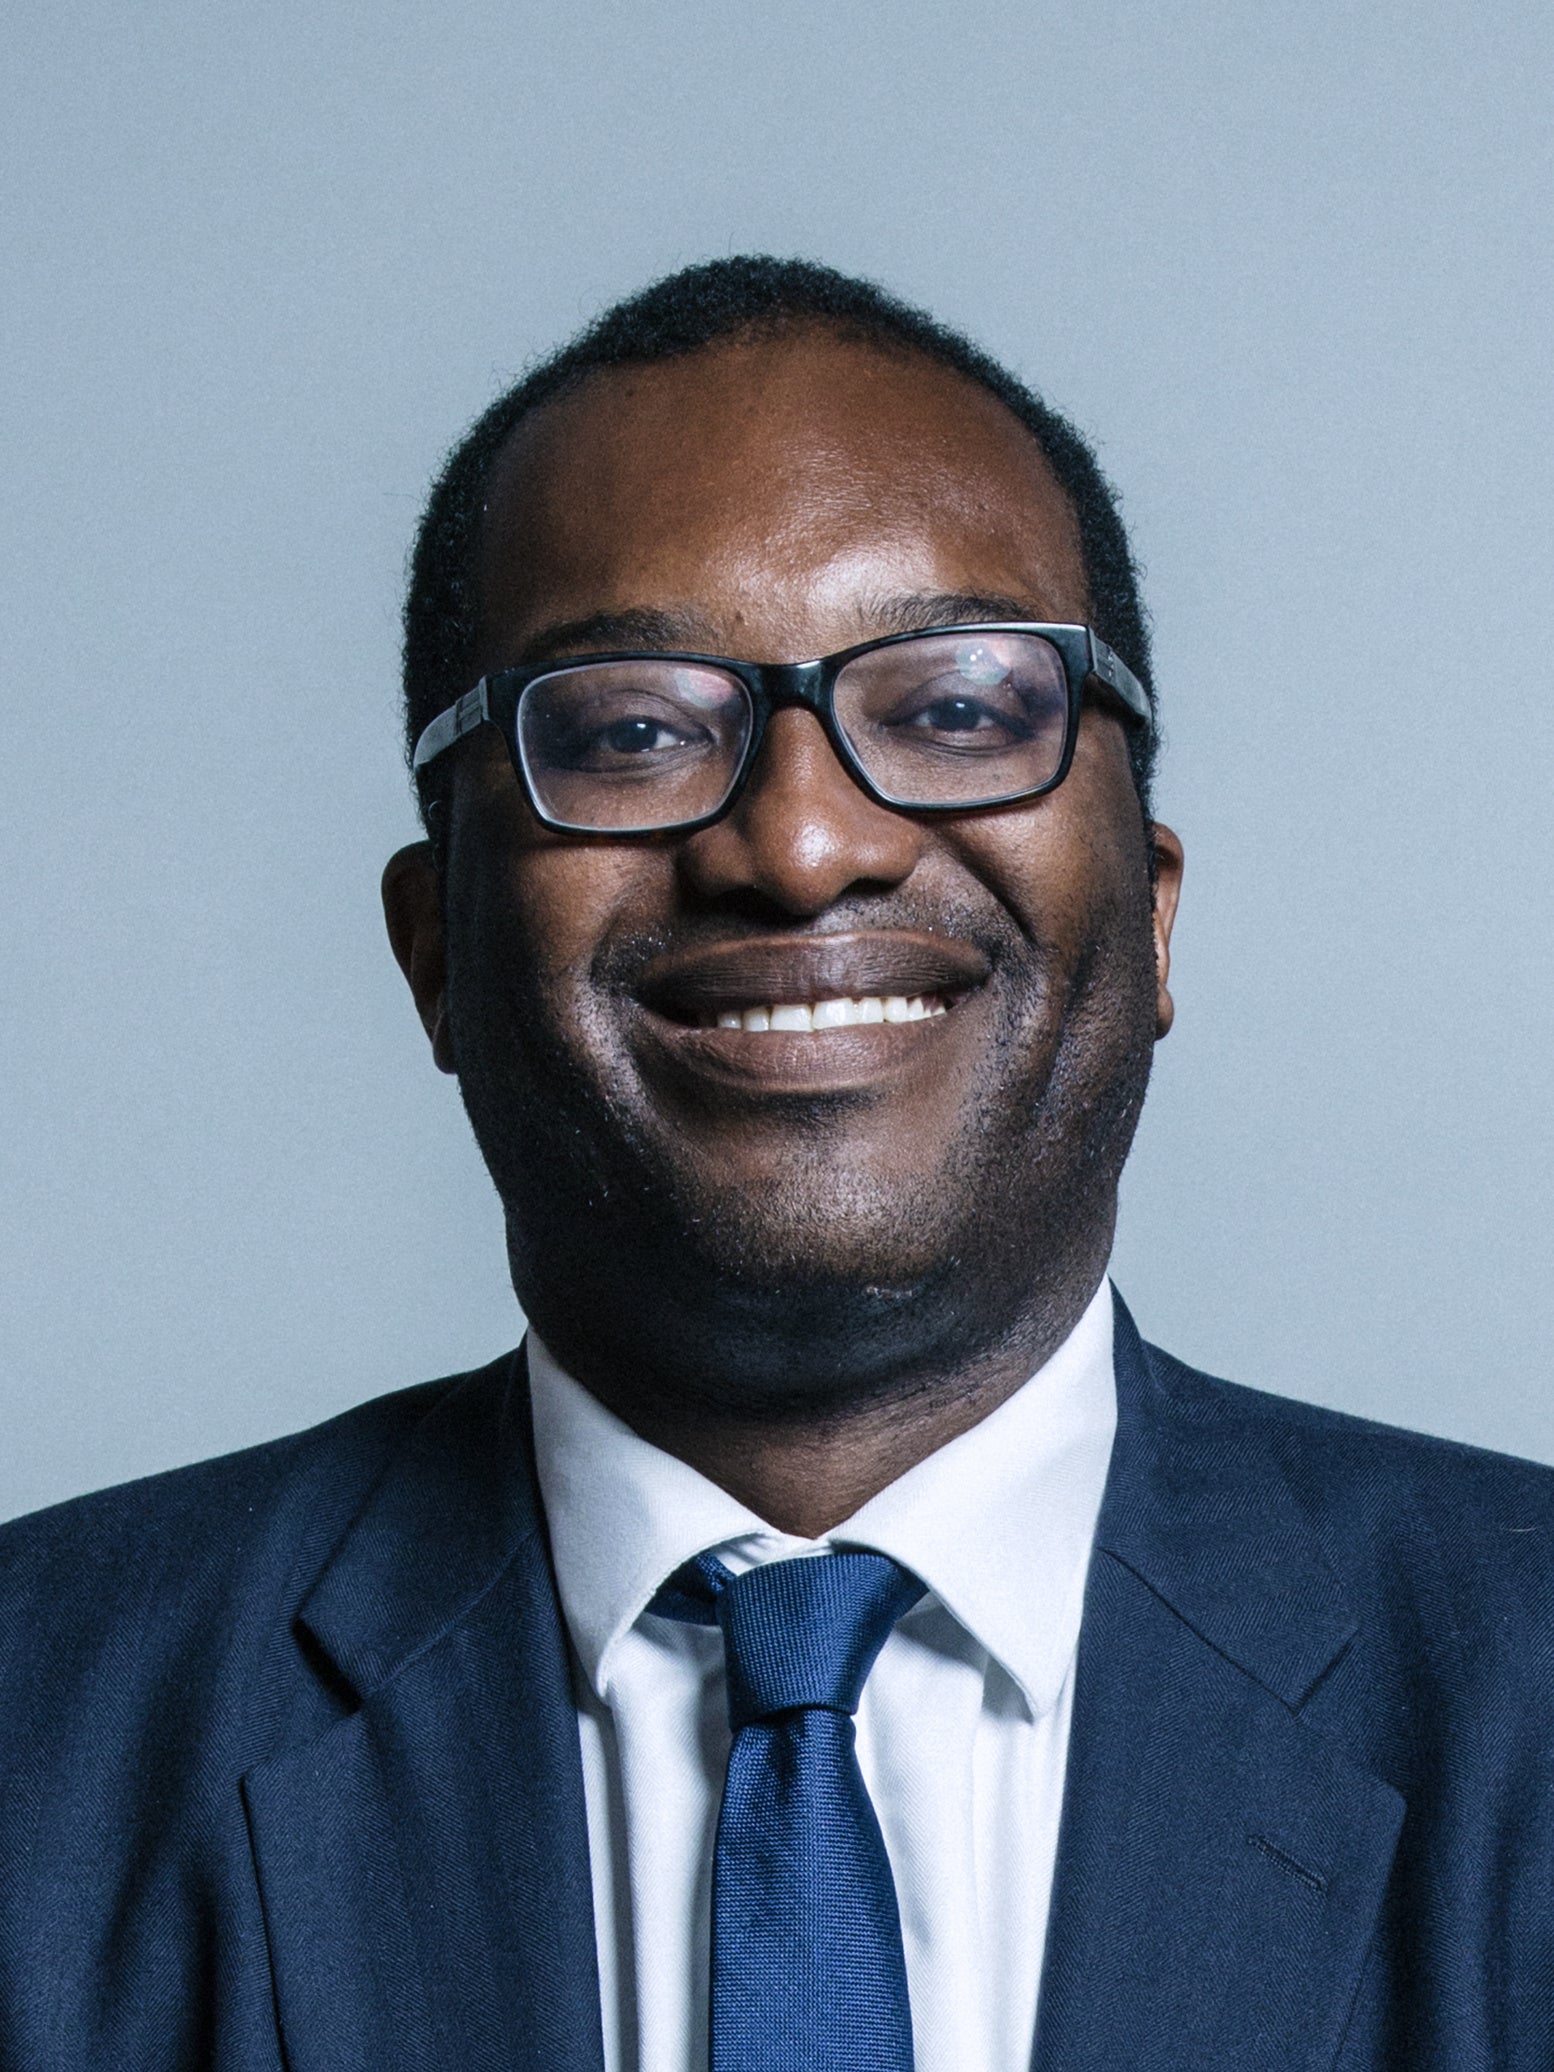 Kwasi Kwarteng was recently appointed business secretary, relieving Alok Sharma of the role and allowing him to focus on his ole as president of the UN COP26 climate conference in November